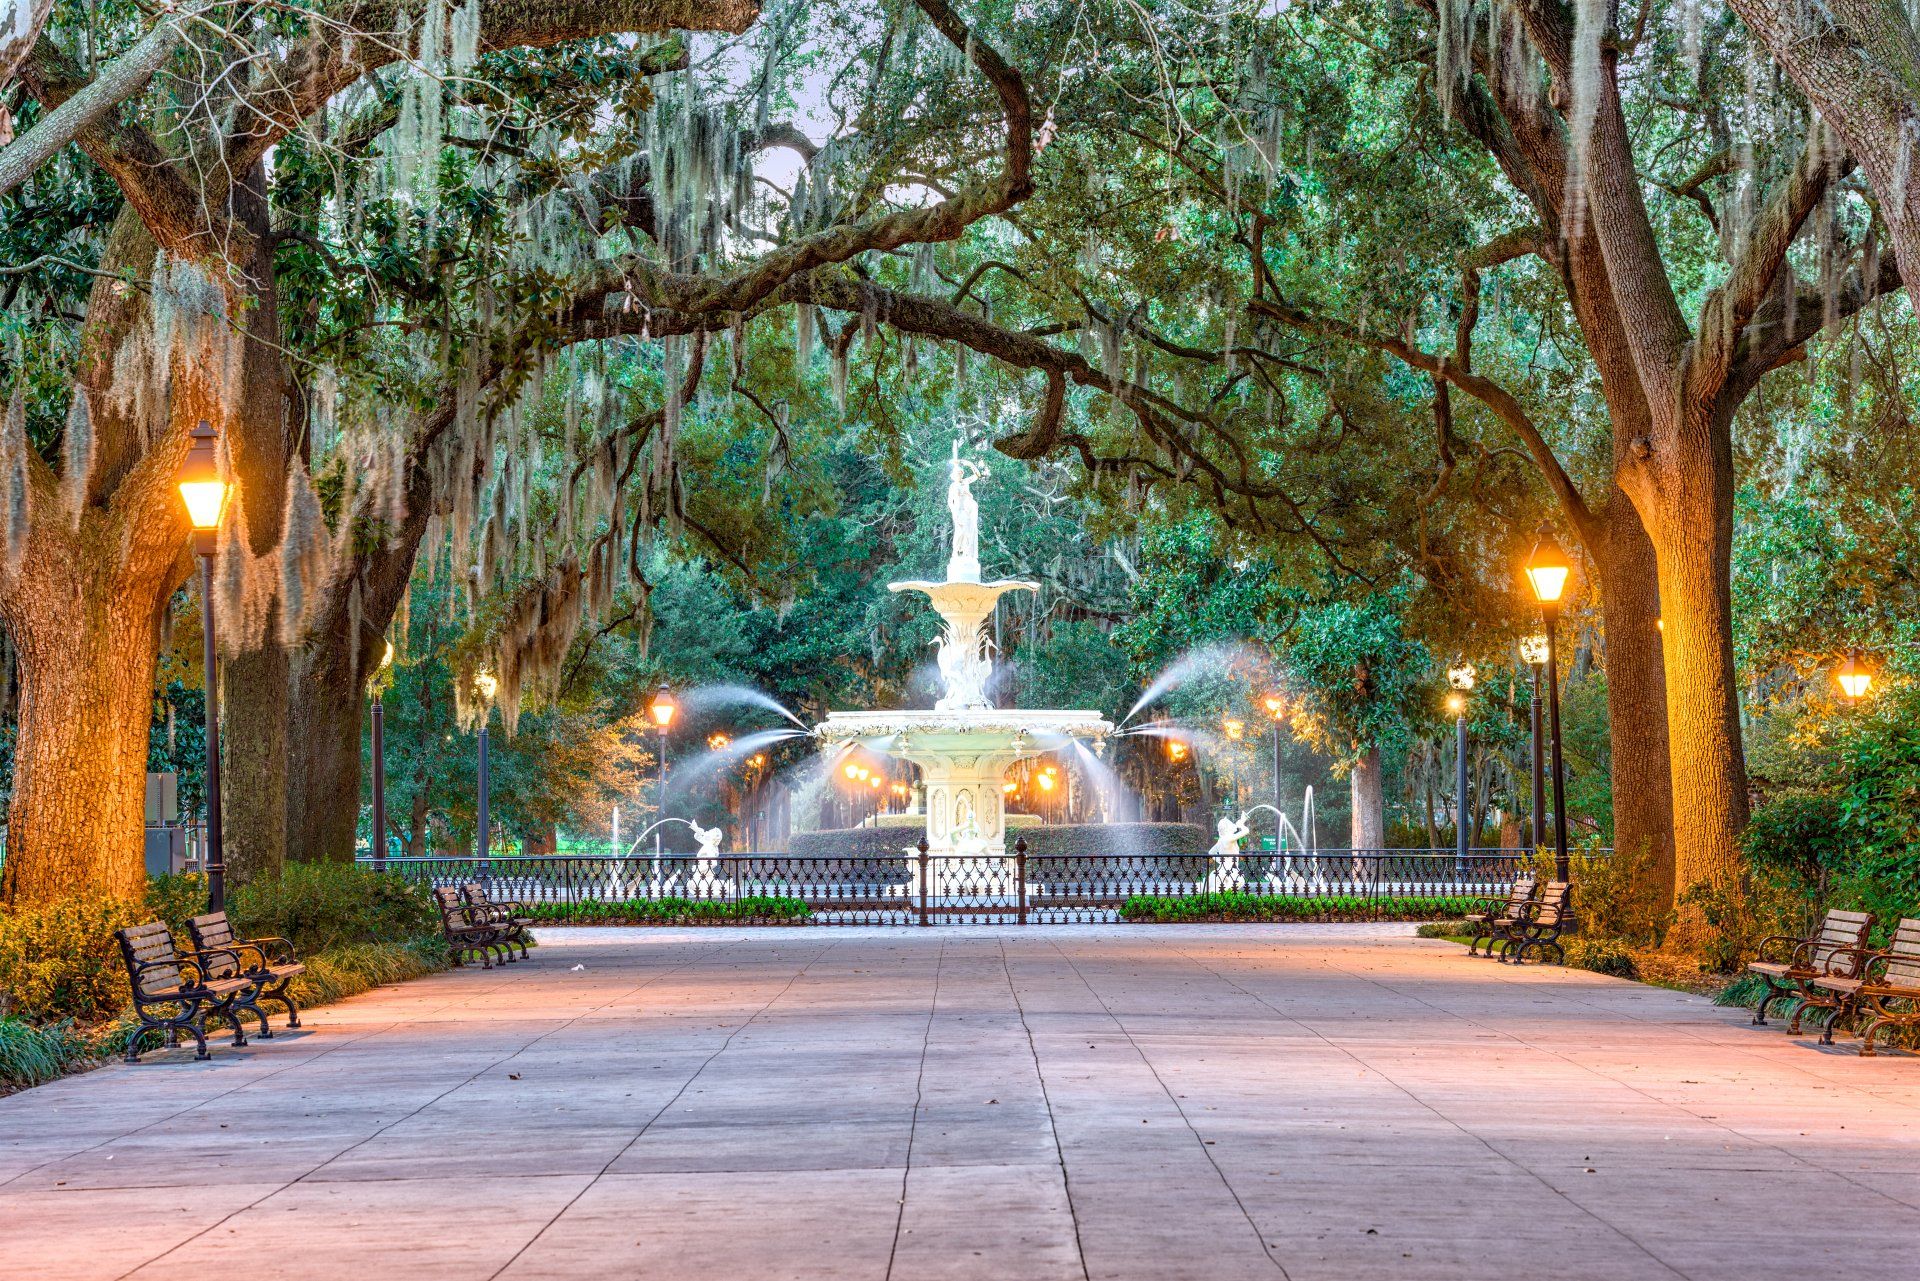 At the north end of Forsyth Park, is the beautiful white marble fountain that Savannah is known for around the world.